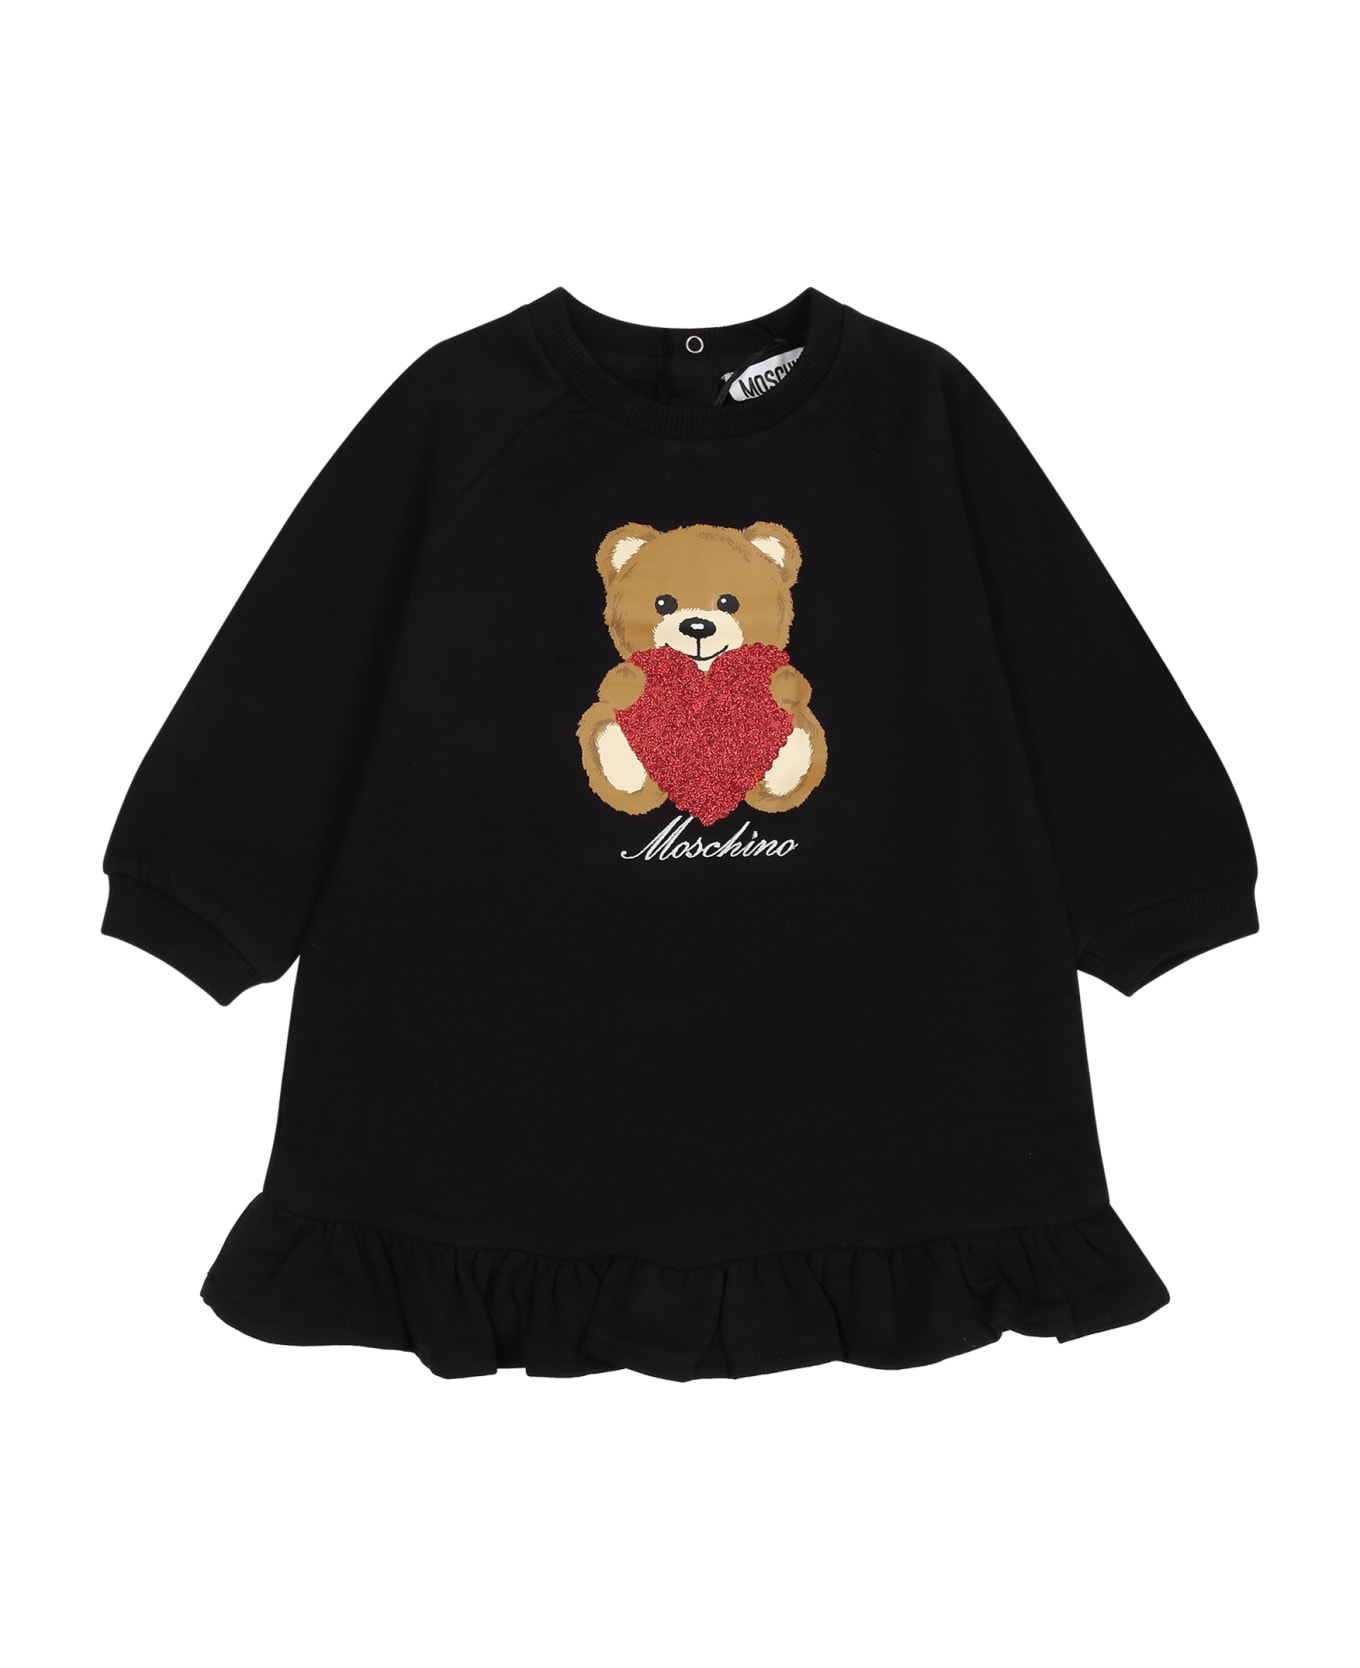 Moschino White T-shirt For Baby Girl With Teddy Bear And Logo - Black ウェア